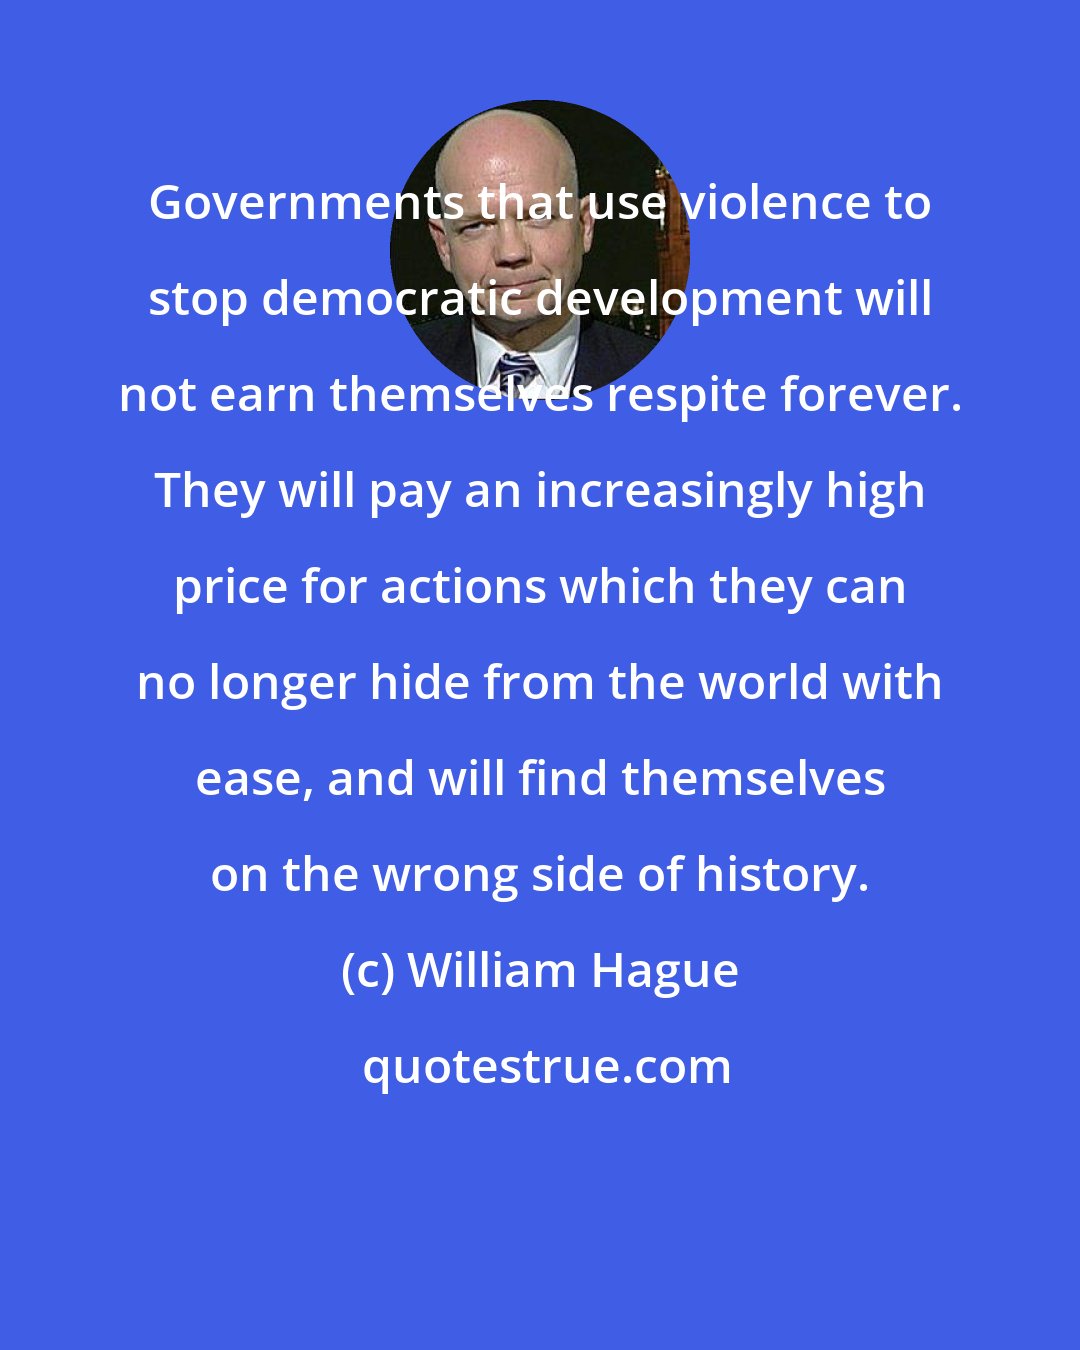 William Hague: Governments that use violence to stop democratic development will not earn themselves respite forever. They will pay an increasingly high price for actions which they can no longer hide from the world with ease, and will find themselves on the wrong side of history.